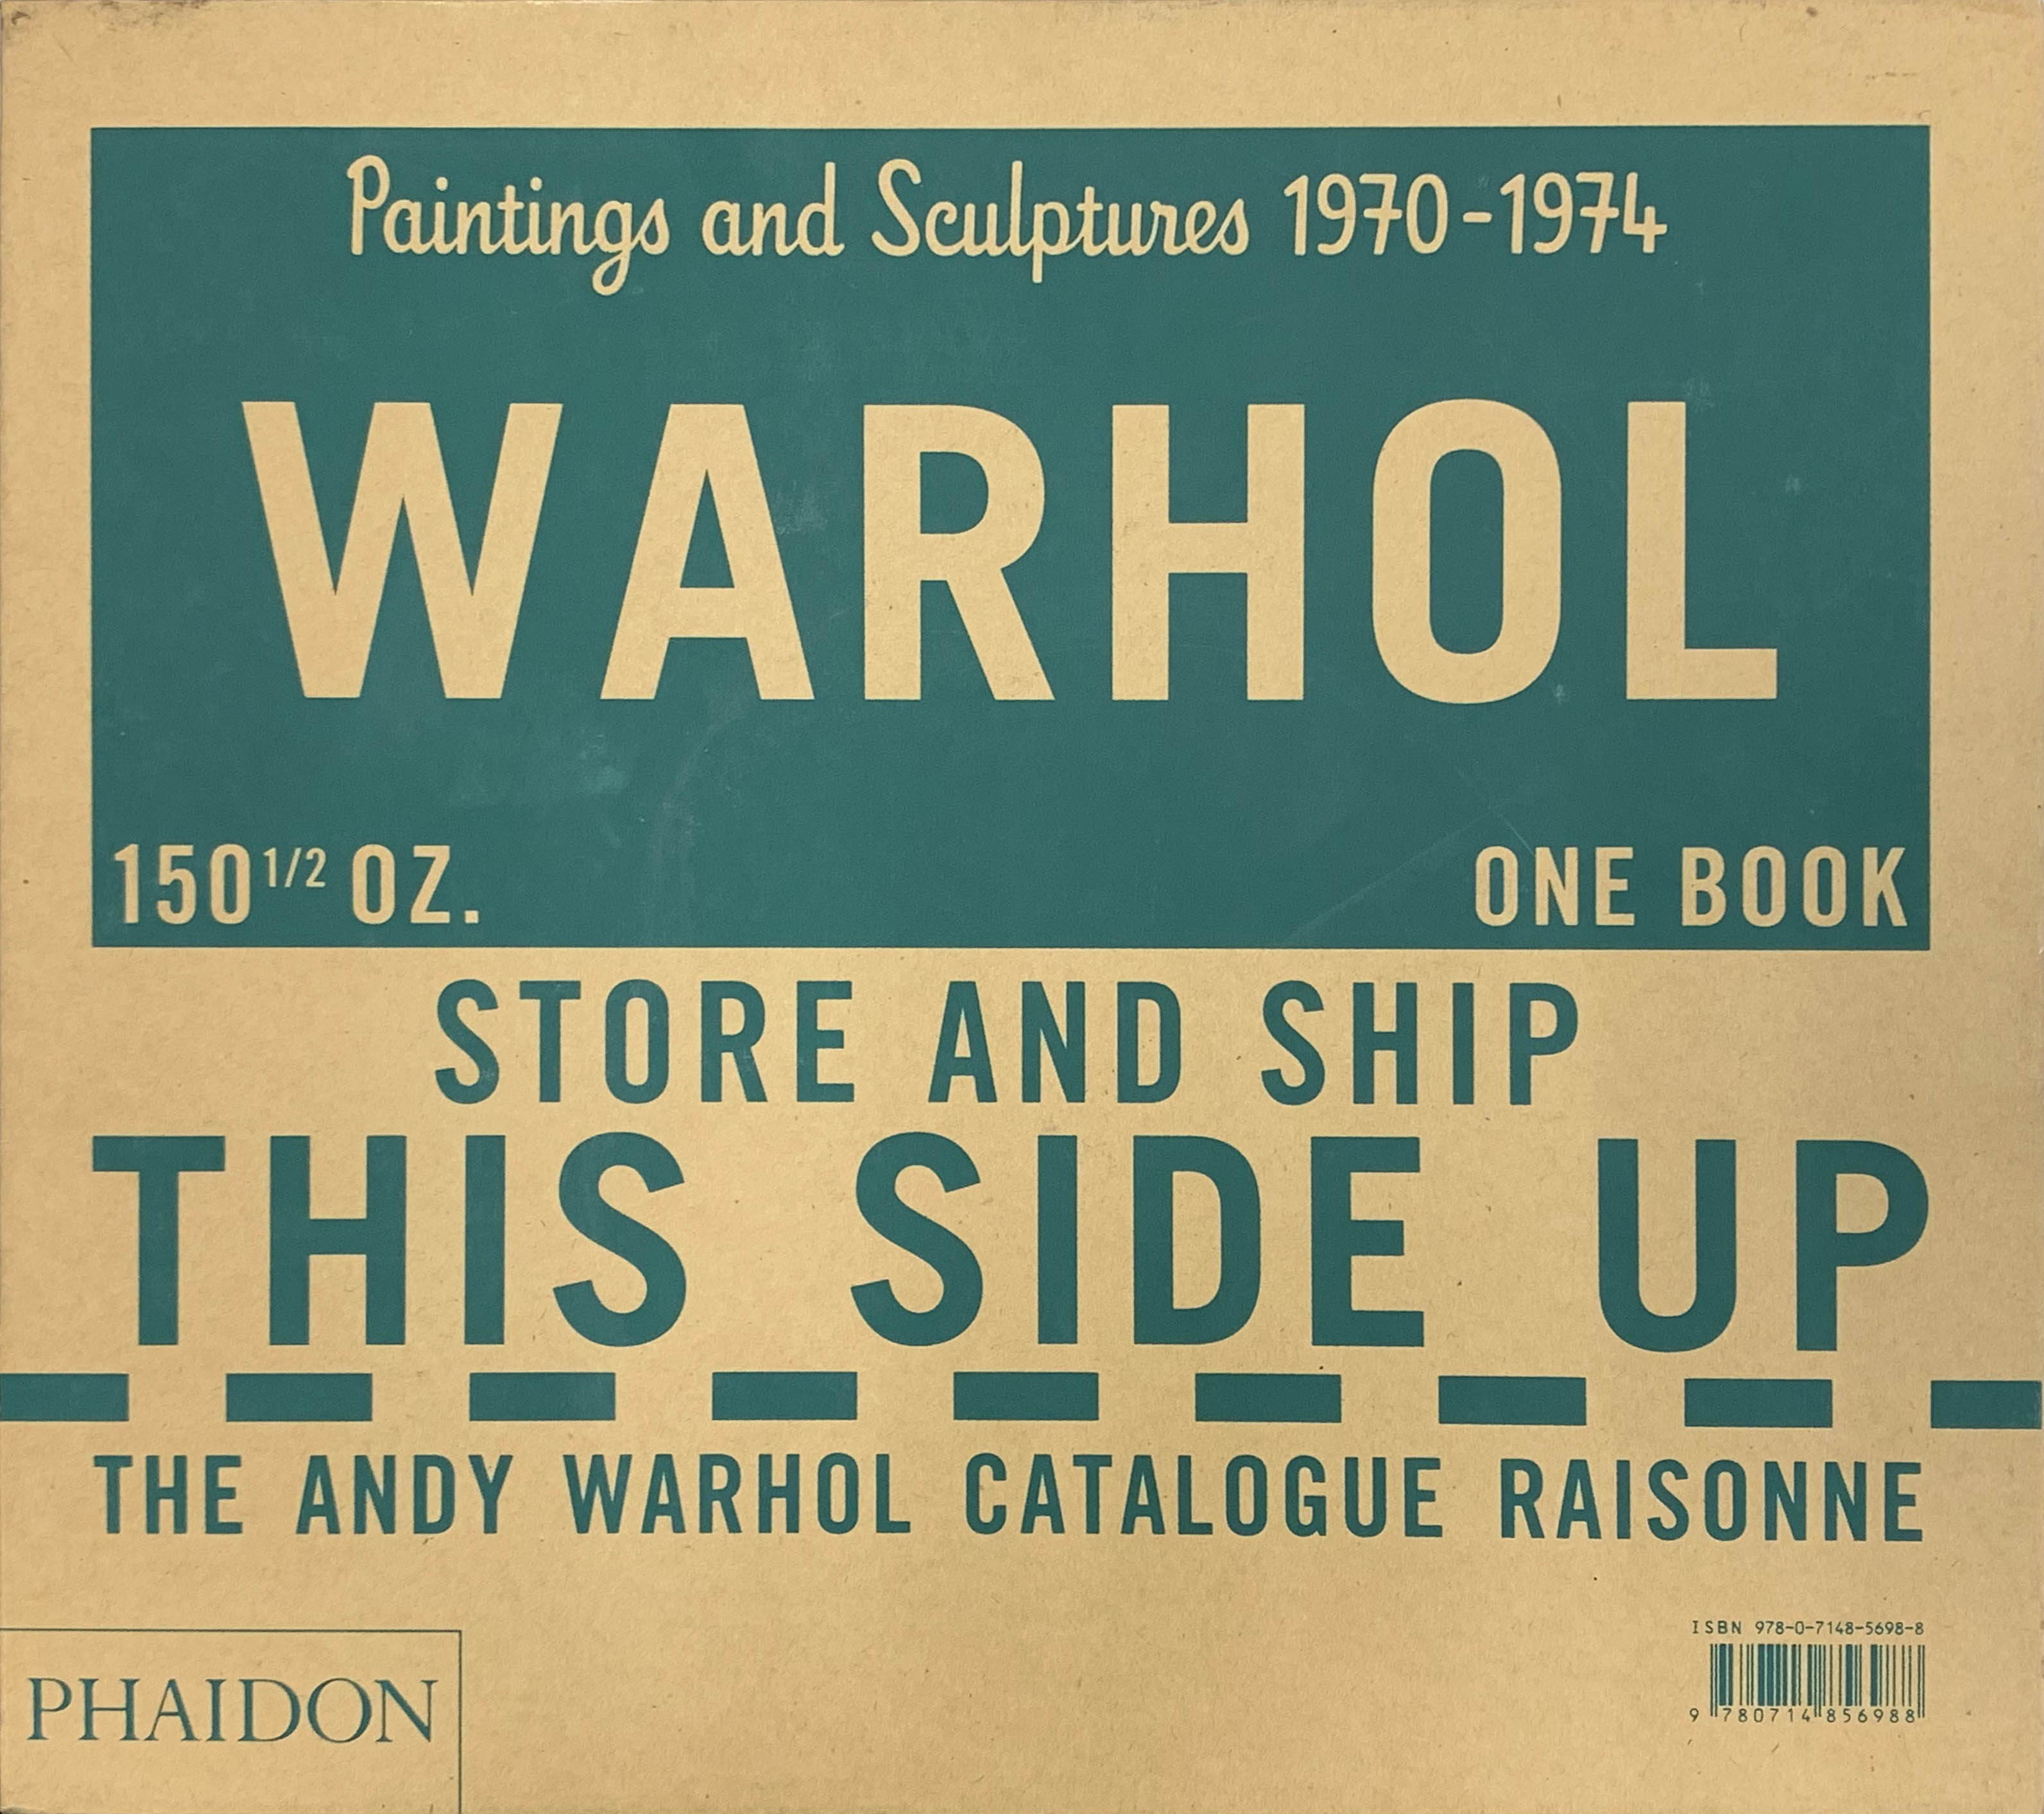 「The Andy Warhol Catalogue Raisonne Paintings and Sculptures vol.03 1970-1974 / Andy Warhol 」メイン画像